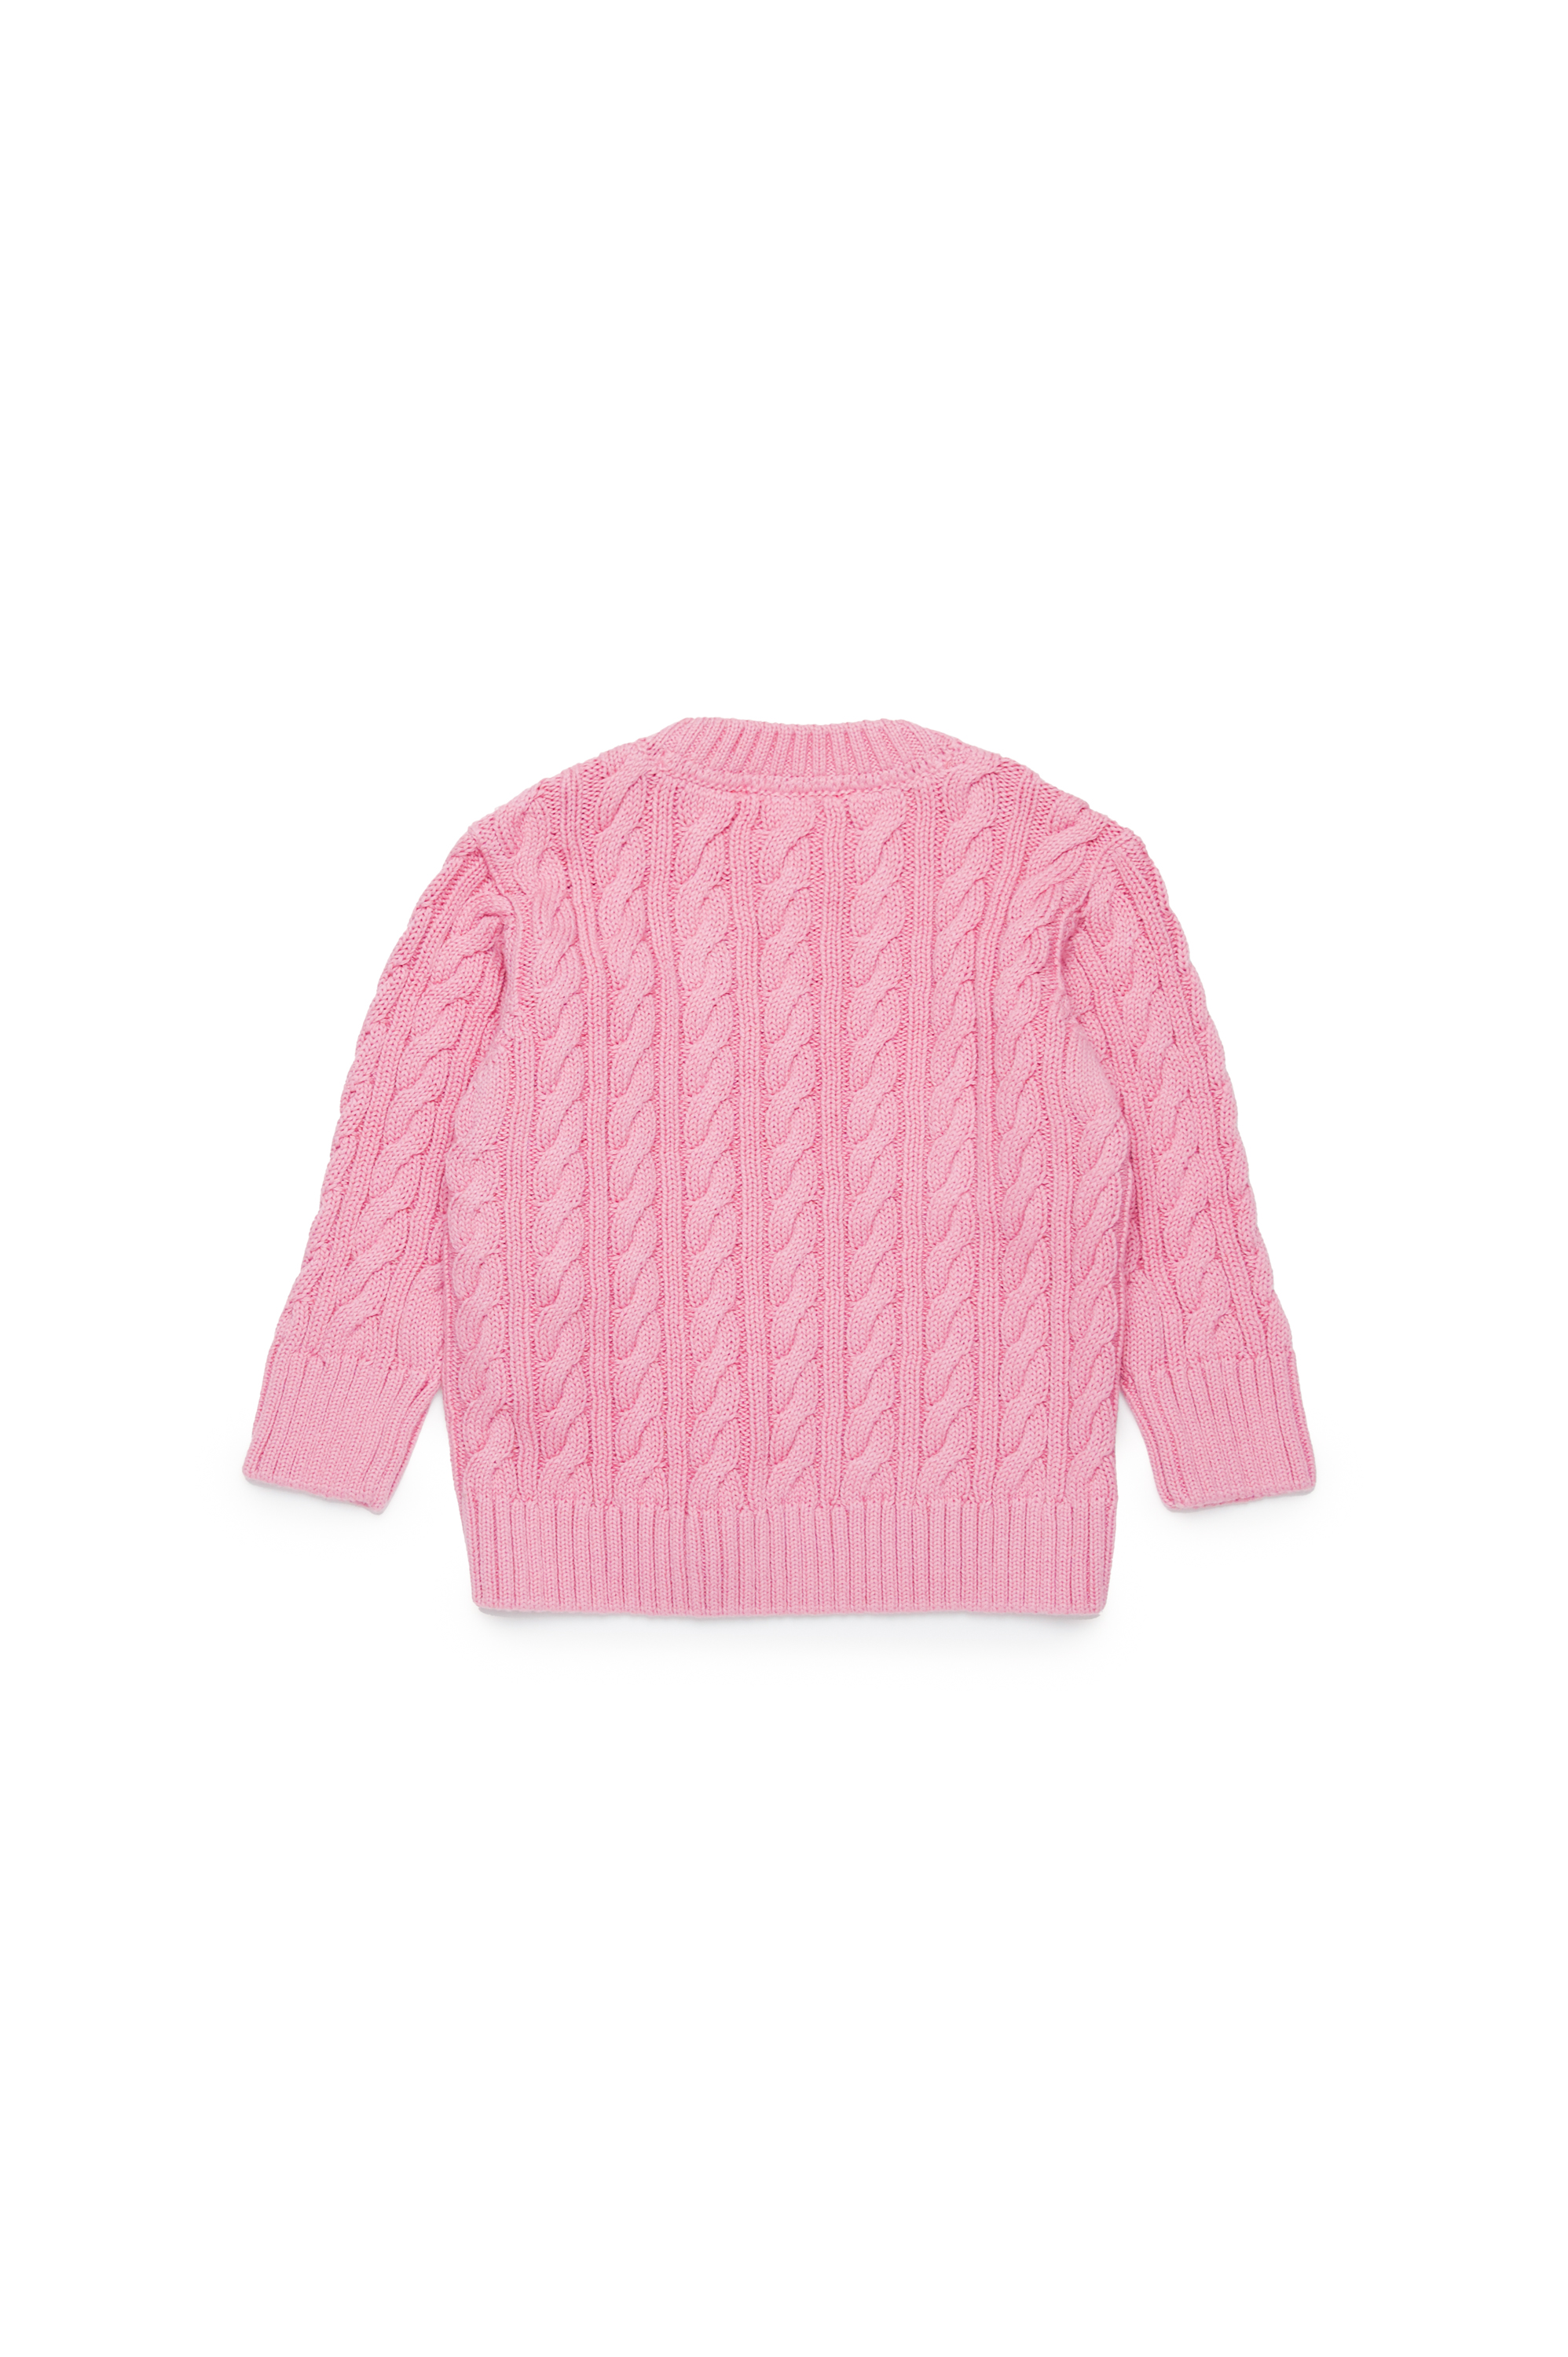 Diesel - KBAMBYB, Unisex Pullover in cotone con patch Oval D in Rosa - Image 2